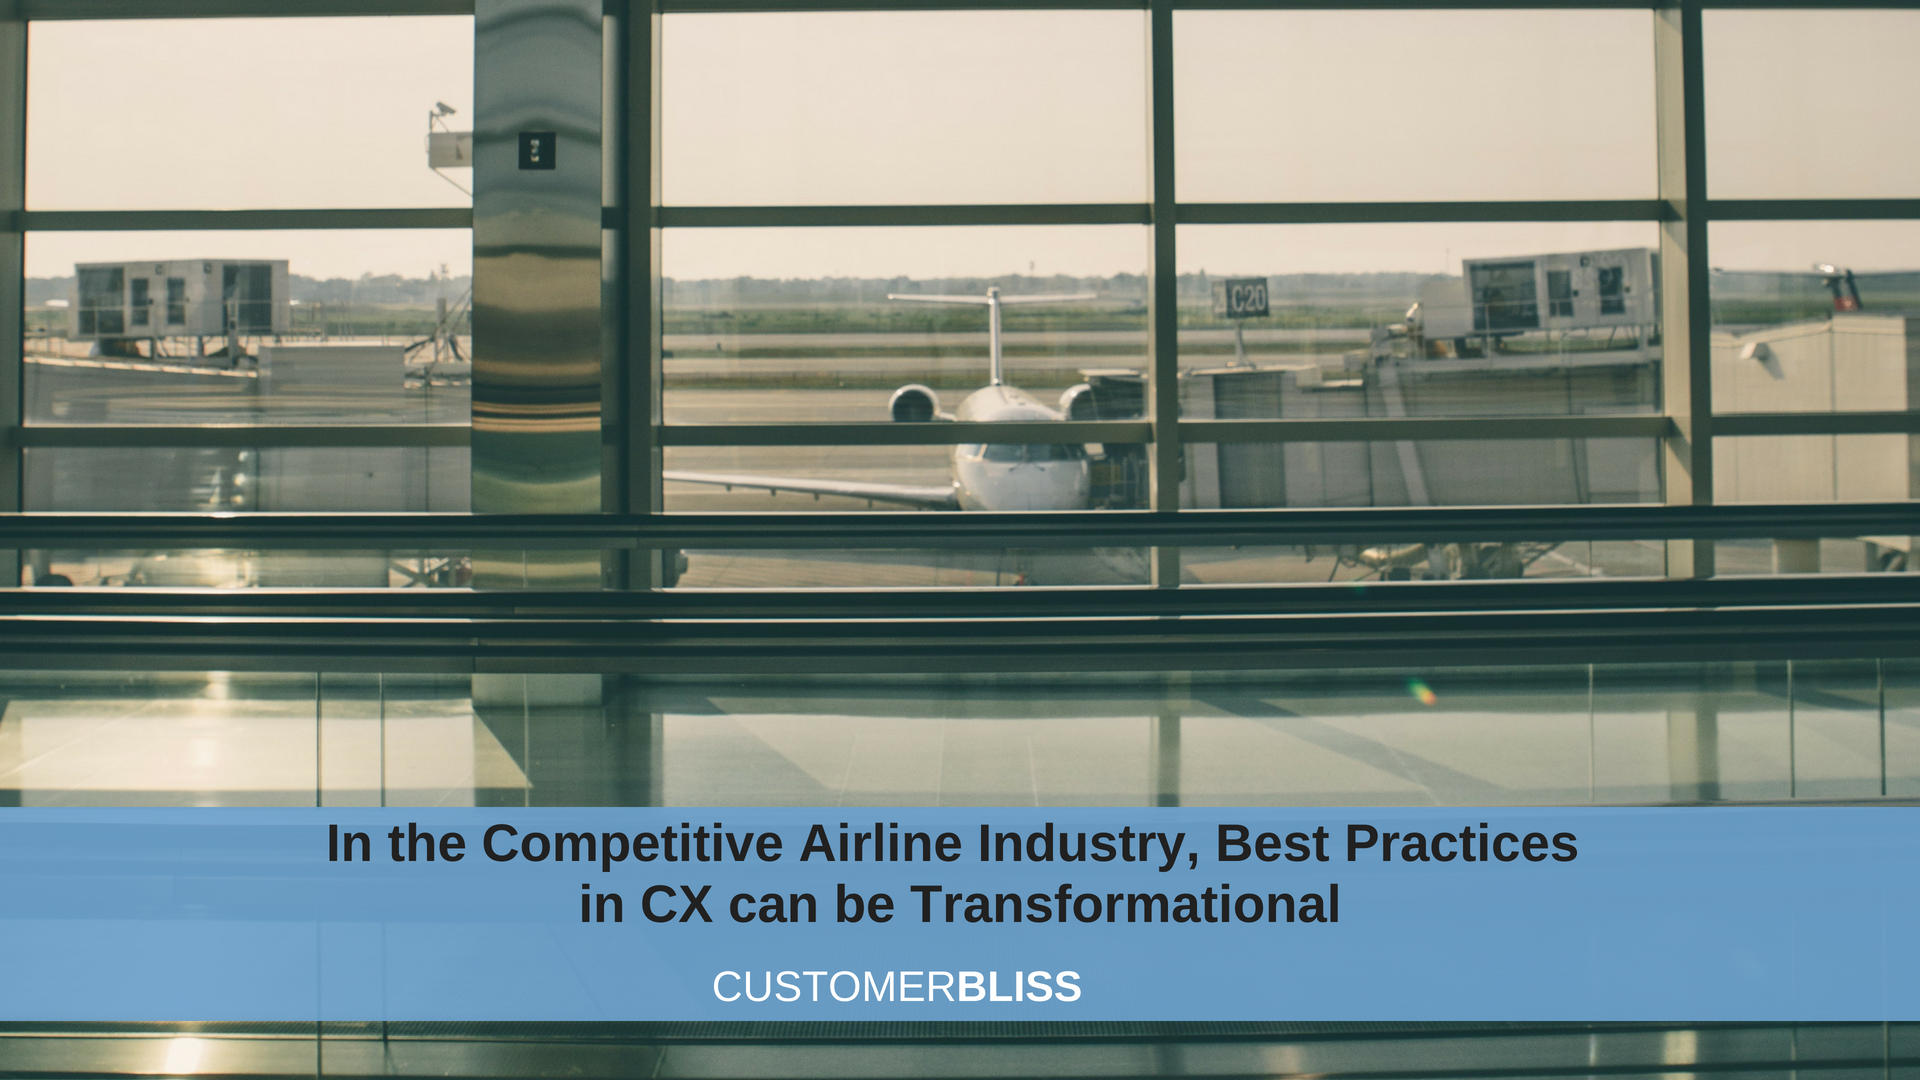 In the Competitive Airline Industry, Best Practices in CX can be Transformational